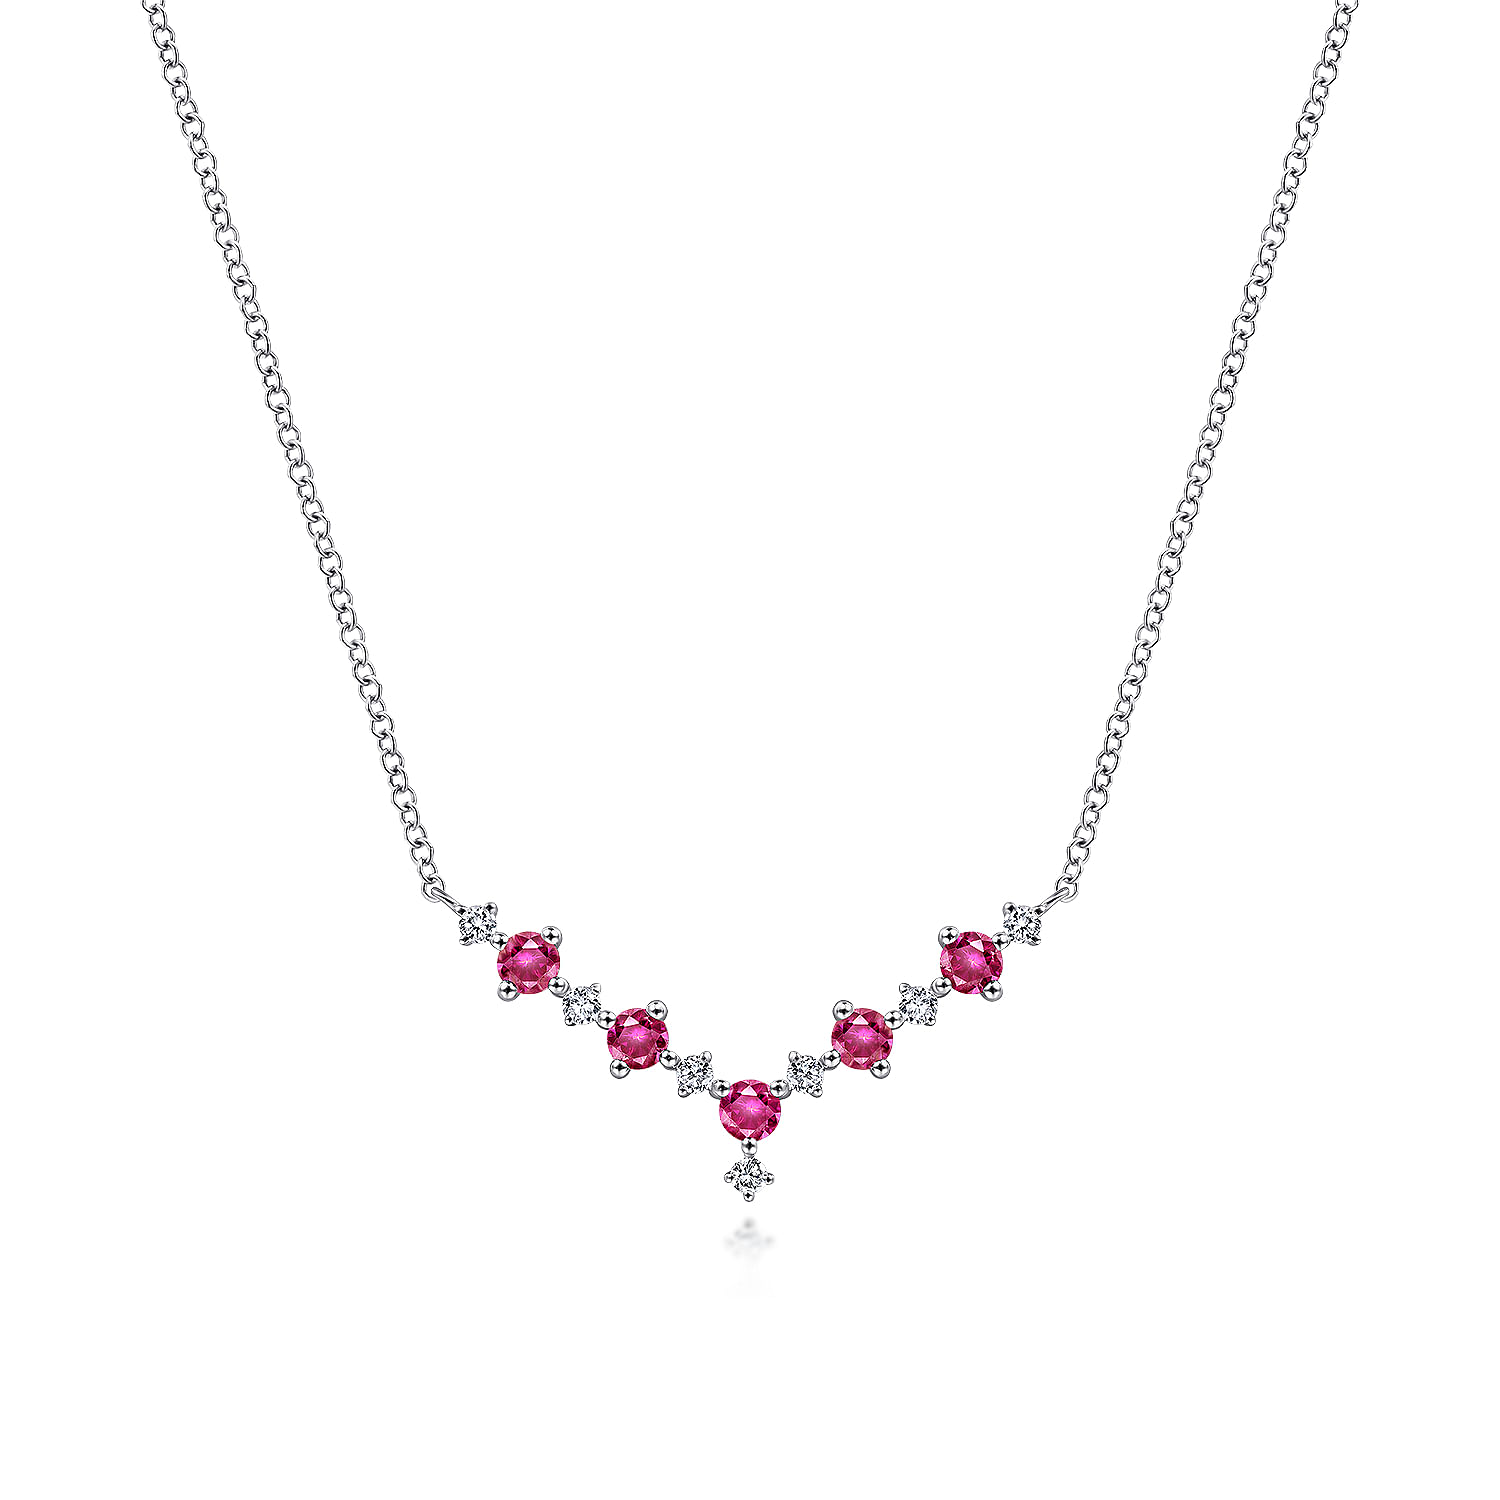 14K White Gold Diamond and Ruby Curved Bar Necklace